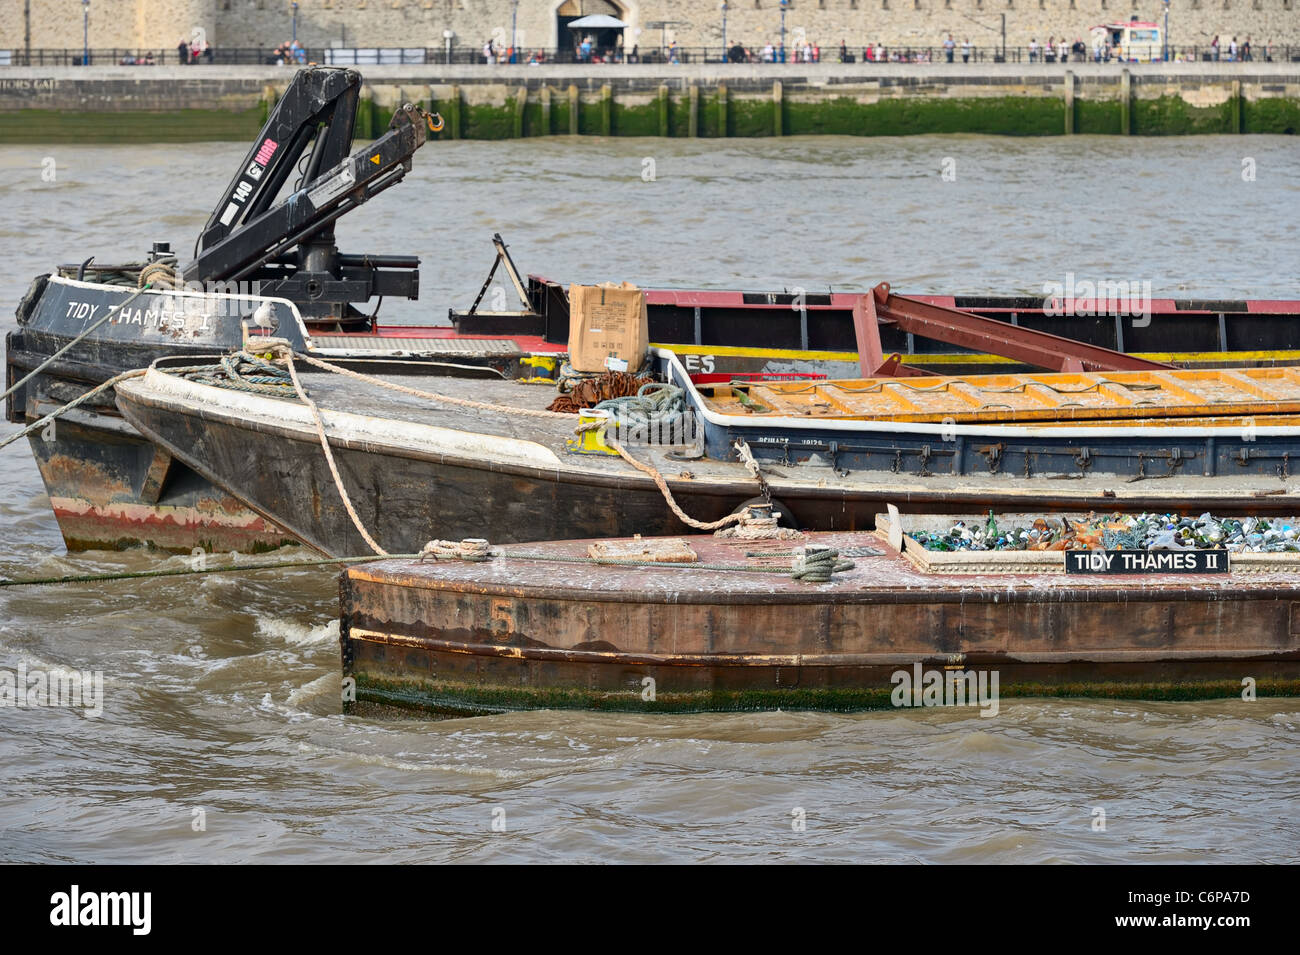 Detail of waste disposal barges on the River Thames, London, England, UK, Europe Stock Photo